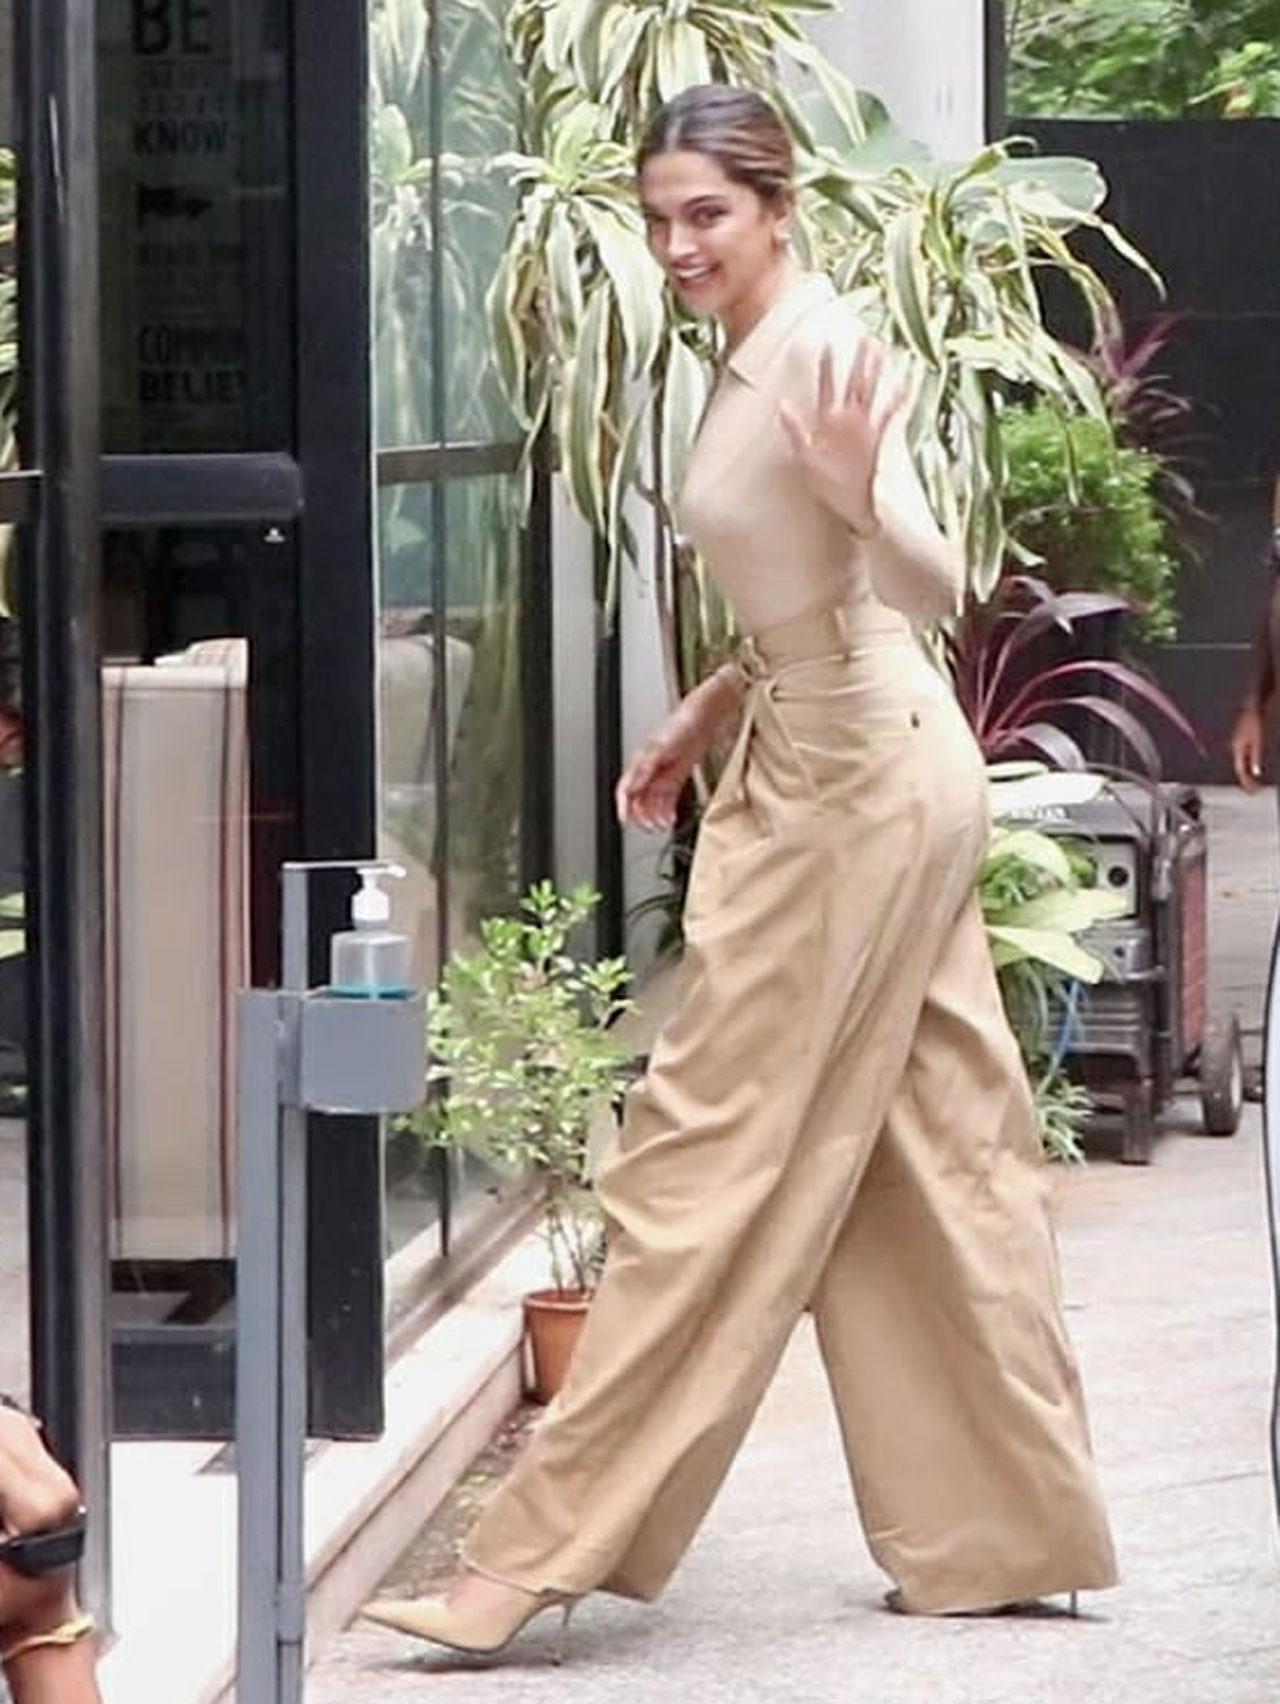 Deepika Padukone beams with smile as she arrives at Dinesh Vijan's office, Maddock Films. She was looking stylish in her outfit. 